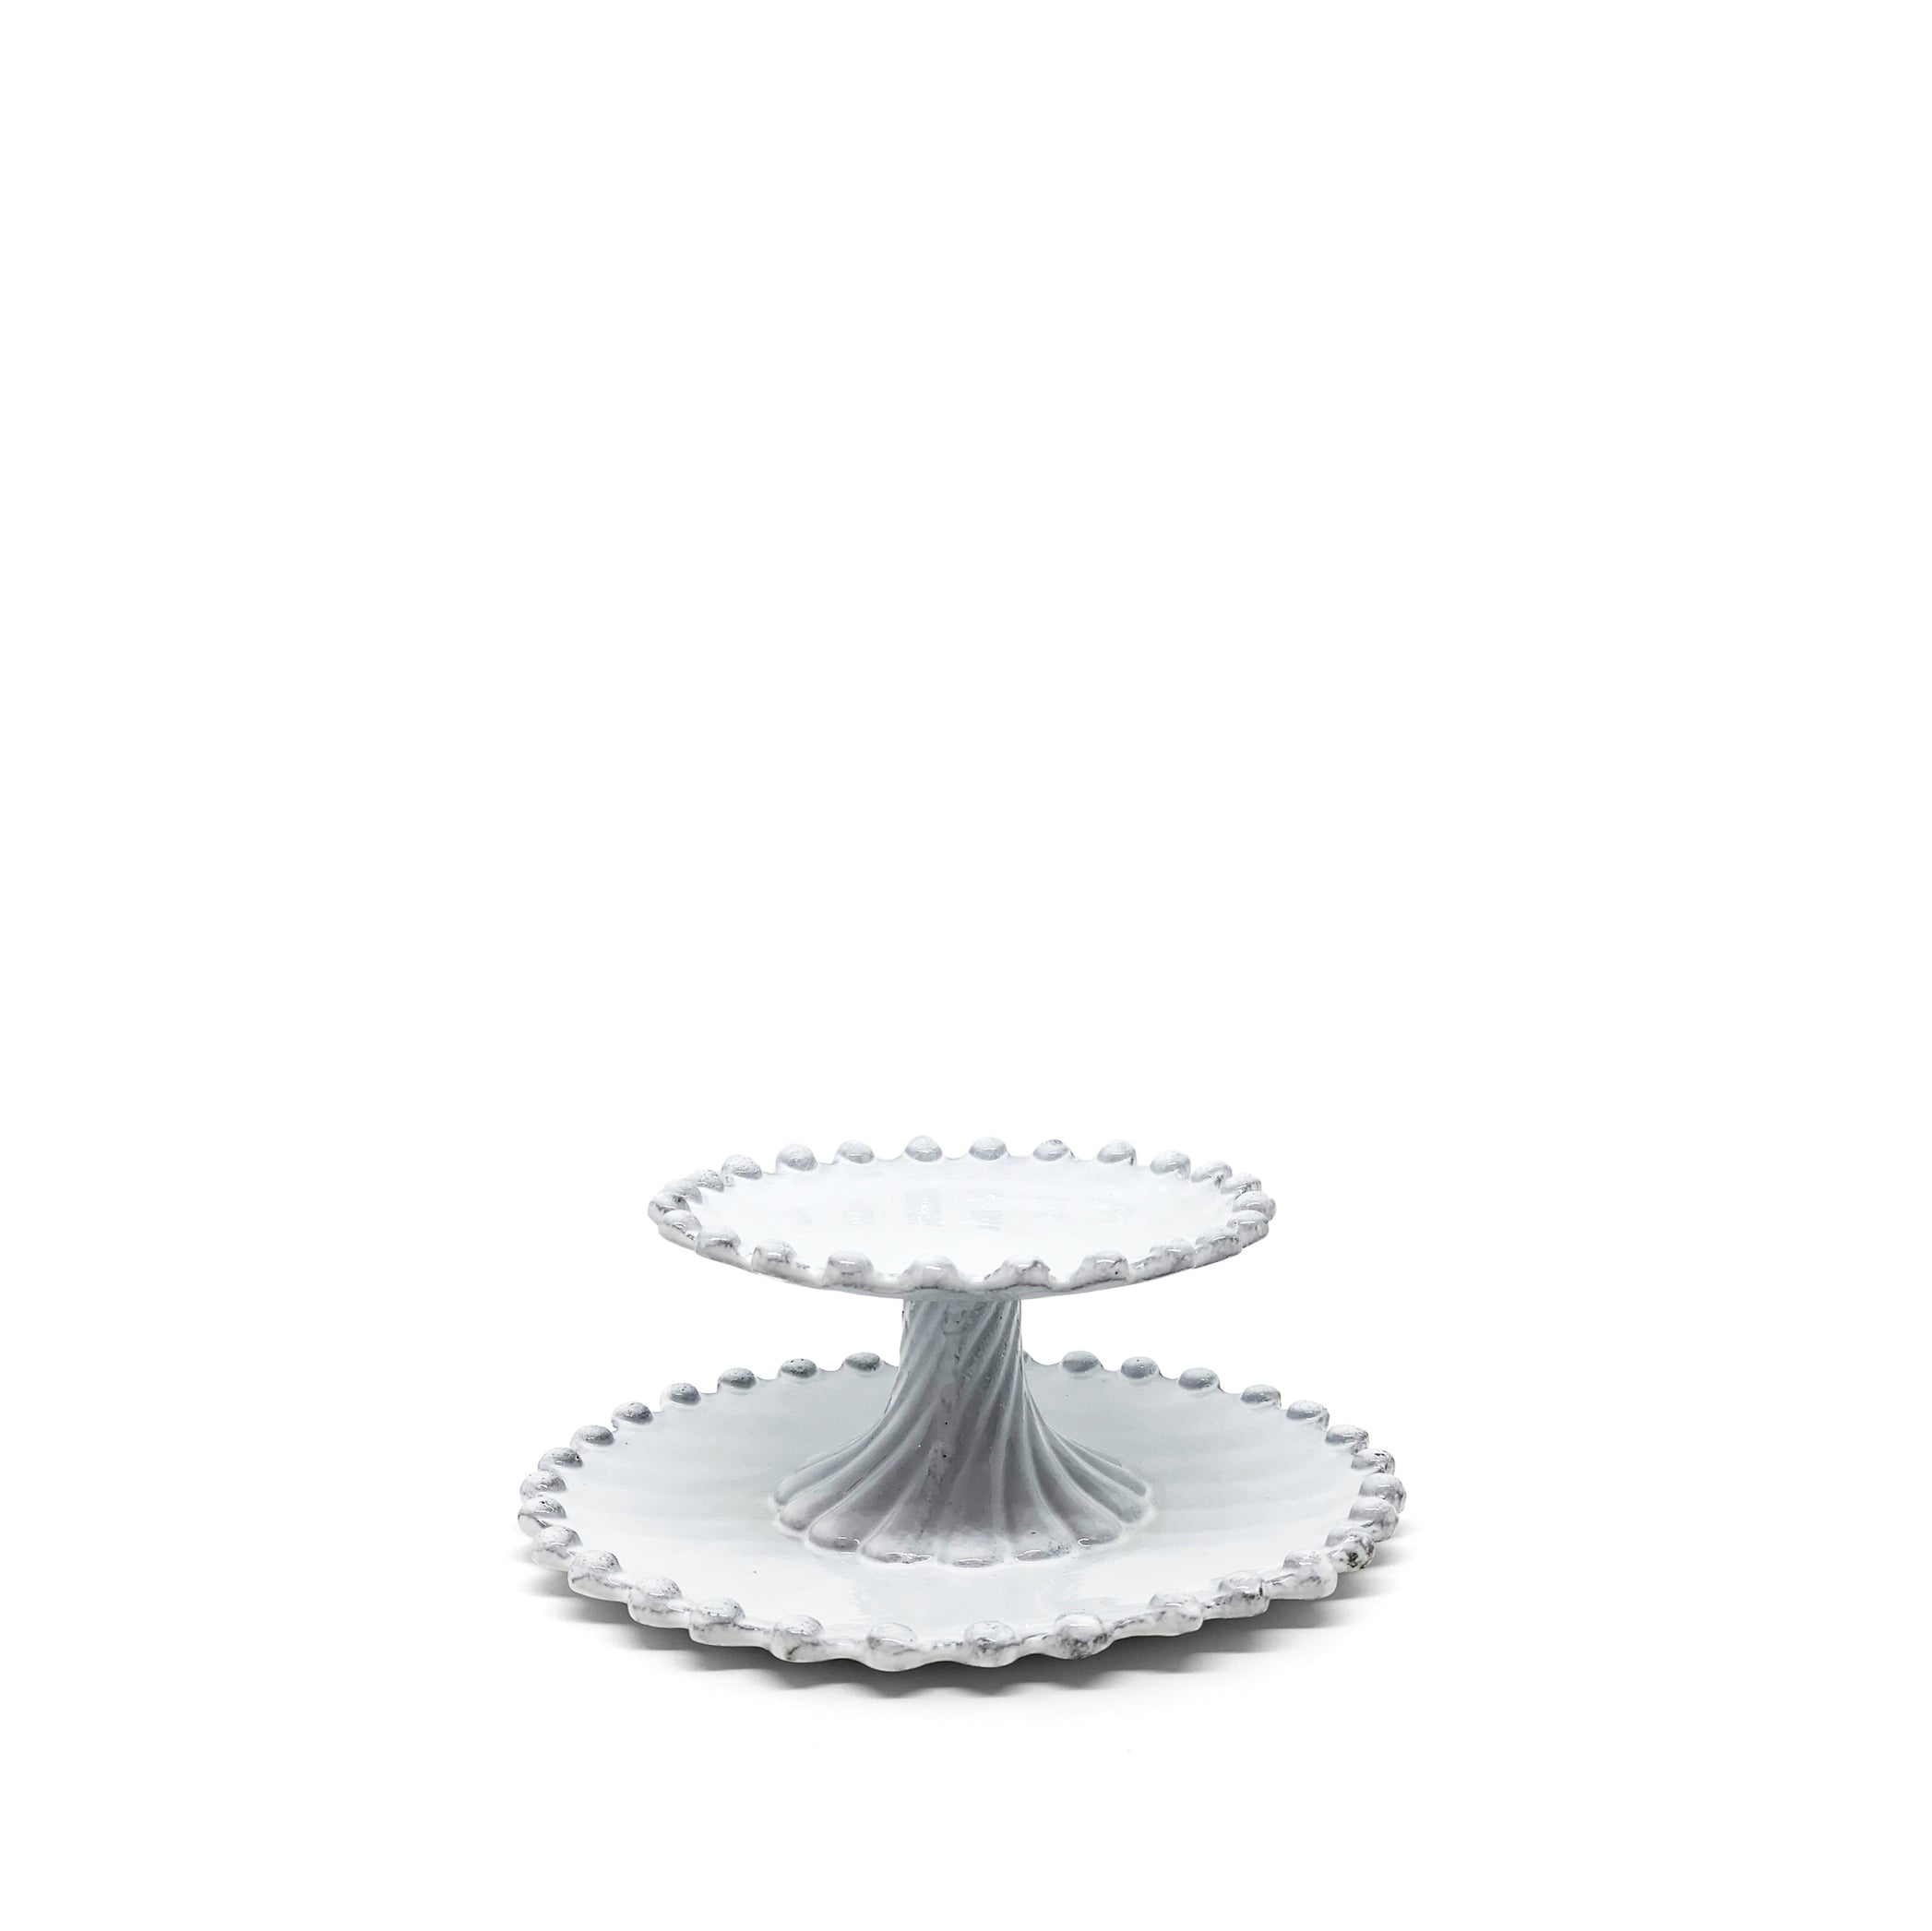 Adelaide Two Level Cake Stand by Astier de Villatte, 16.5cm